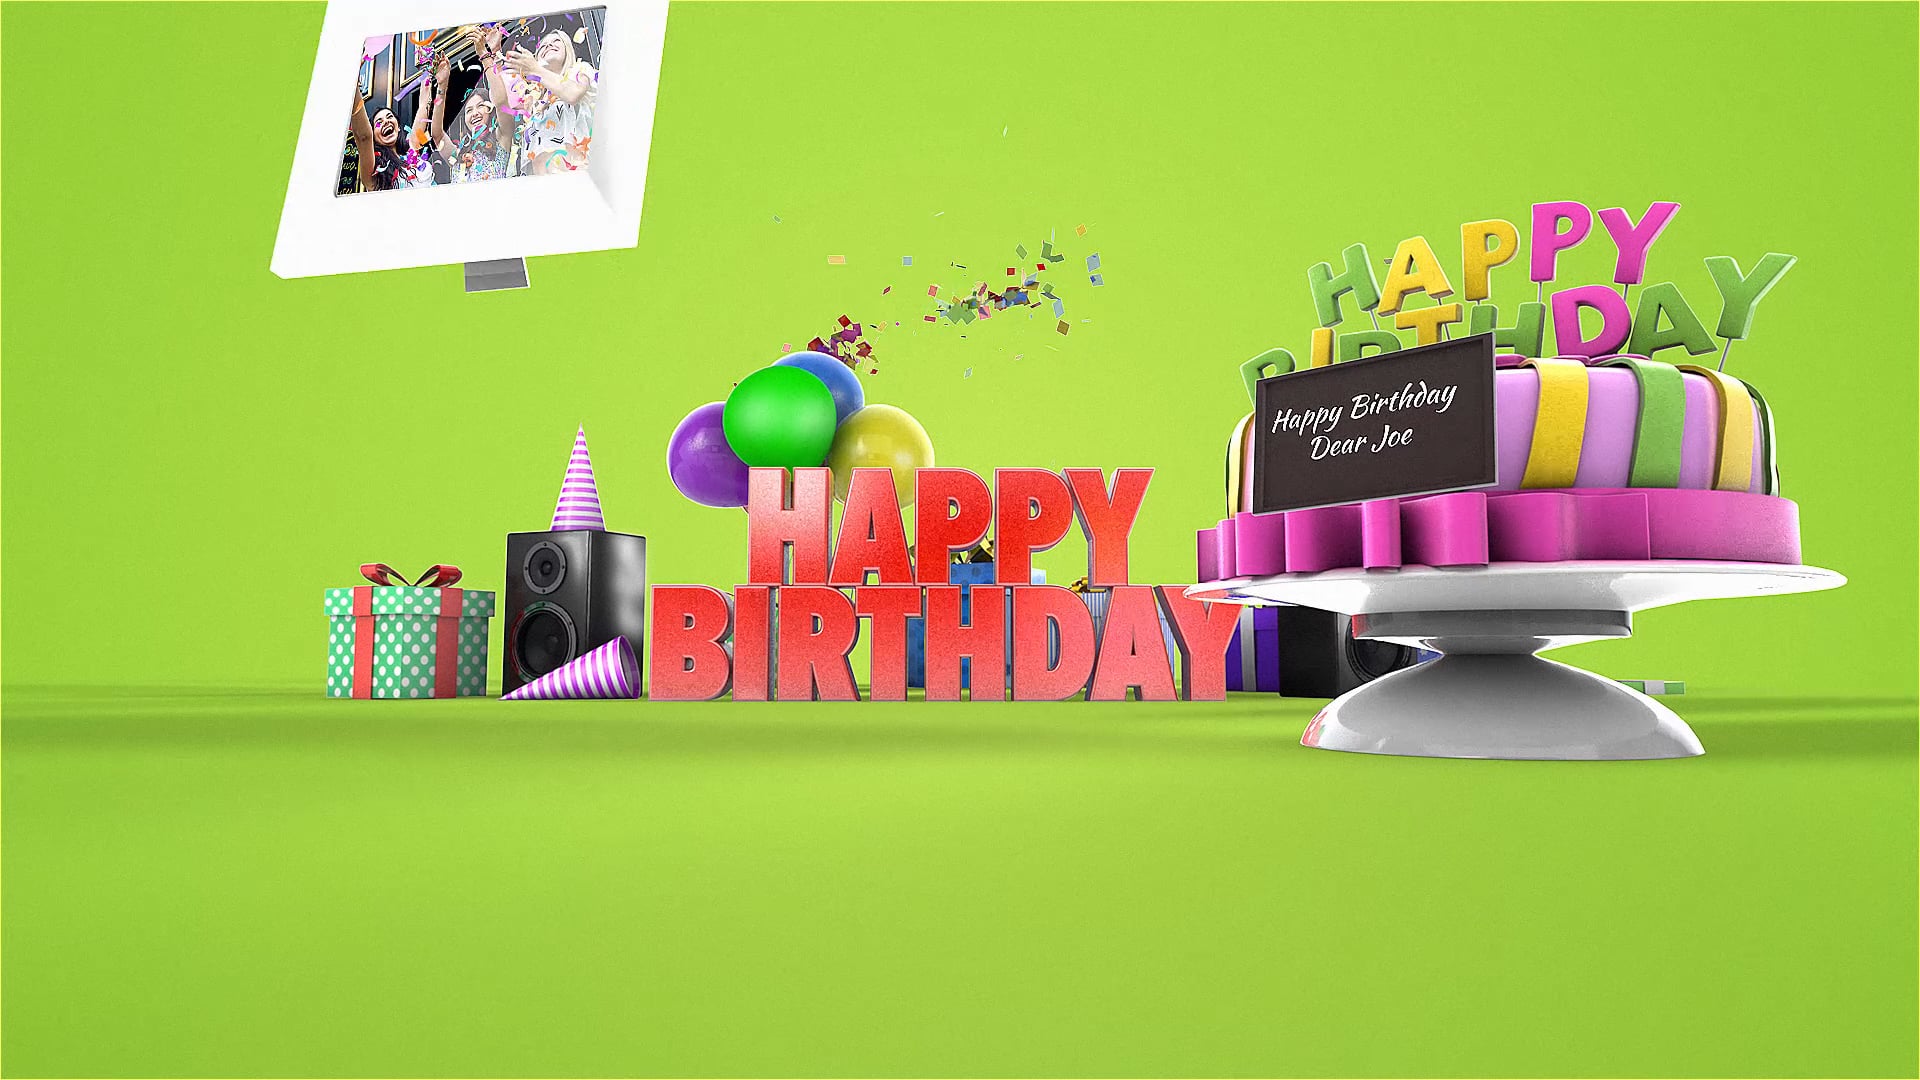 Video 3d Animation Happy Birthday Wishes - 1920x1080 Wallpaper 